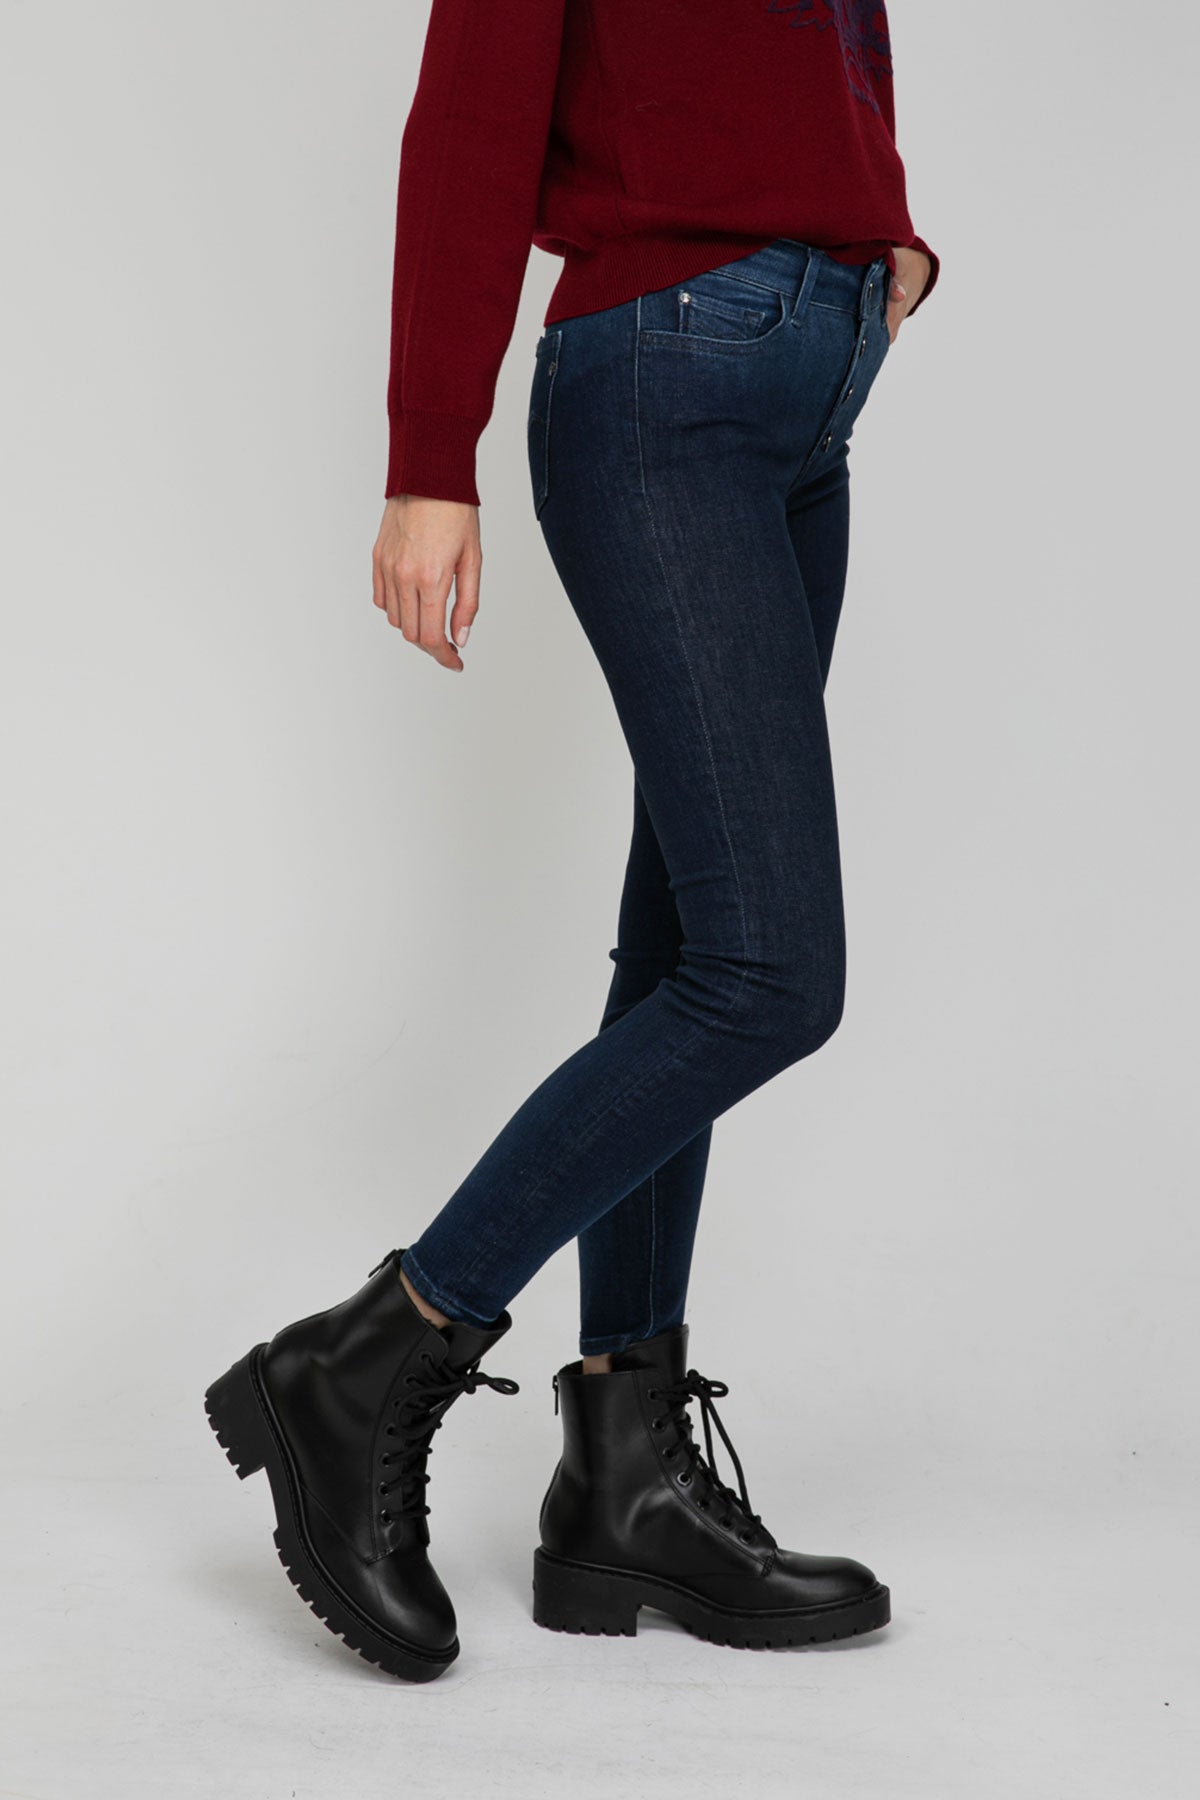 Replay Luzien Skinny High Waist Fit Jeans-Libas Trendy Fashion Store